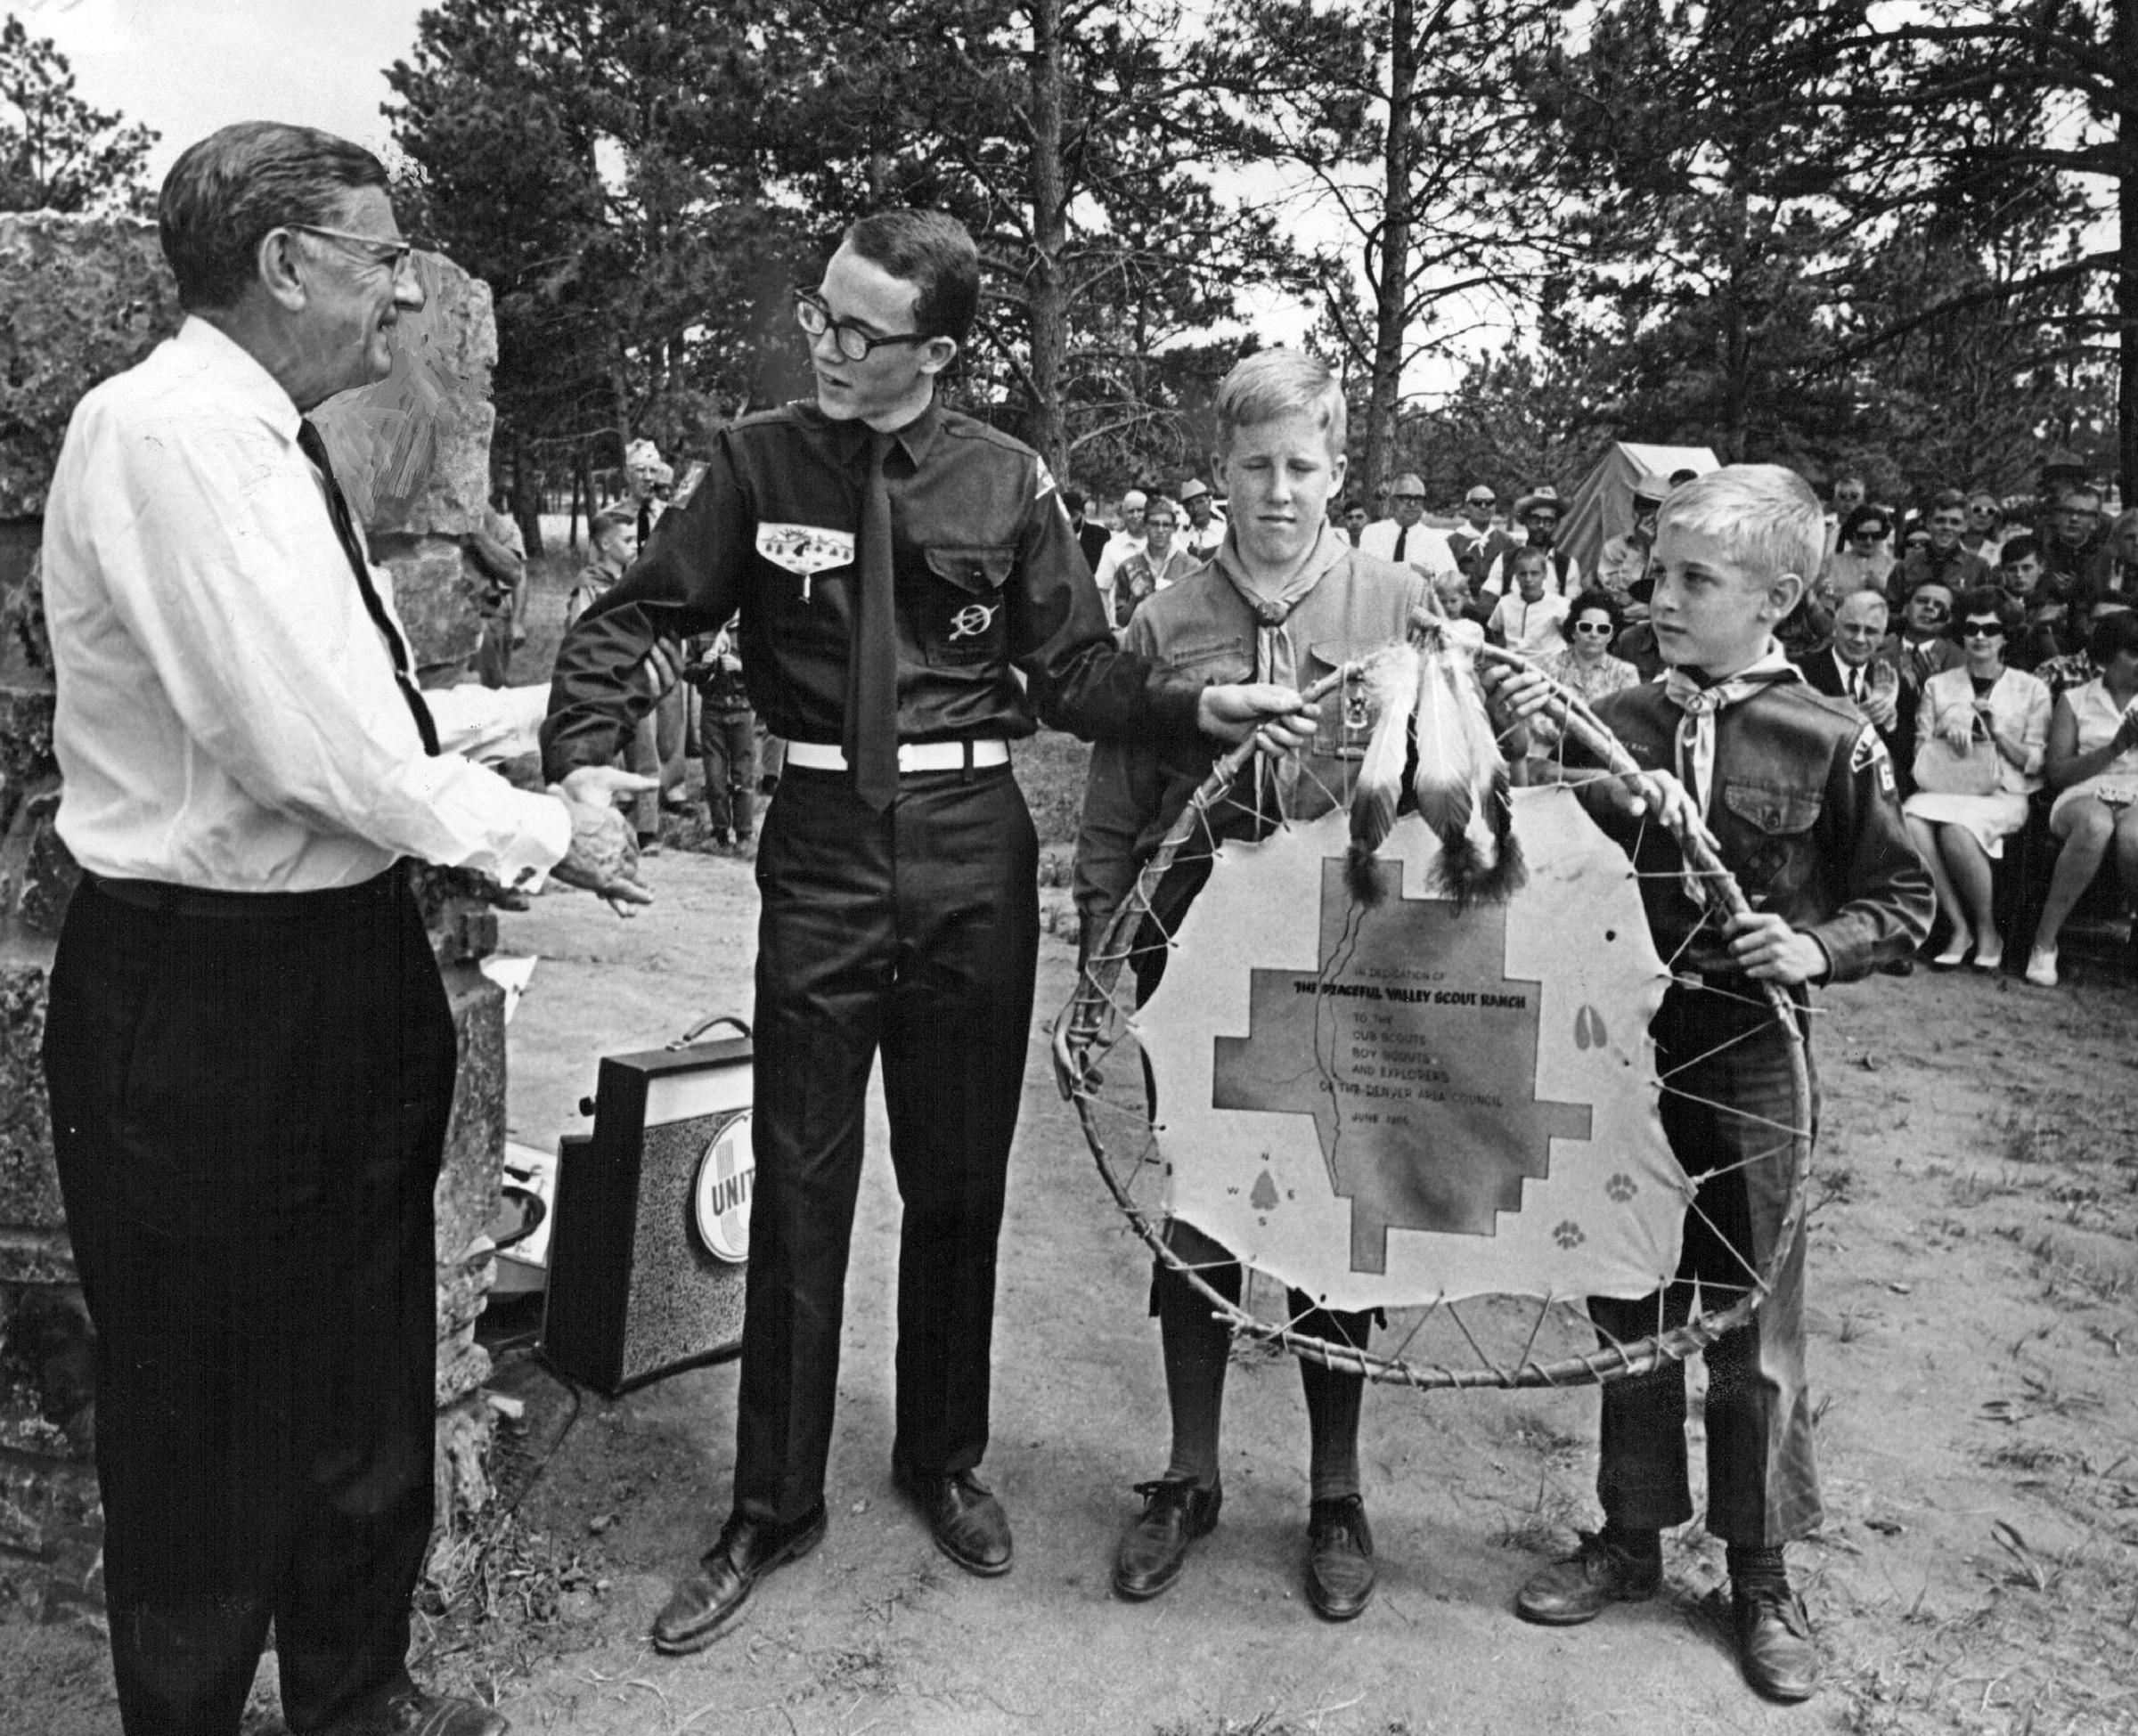 J. Clinton Bowman, president of the Denver Area Council, Boy Scouts of America, presents a leather map of the Peaceful Valley Scout Ranch to three representatives of the Scouts- from left, Keat, Phil and Roger Johnson. 1966.